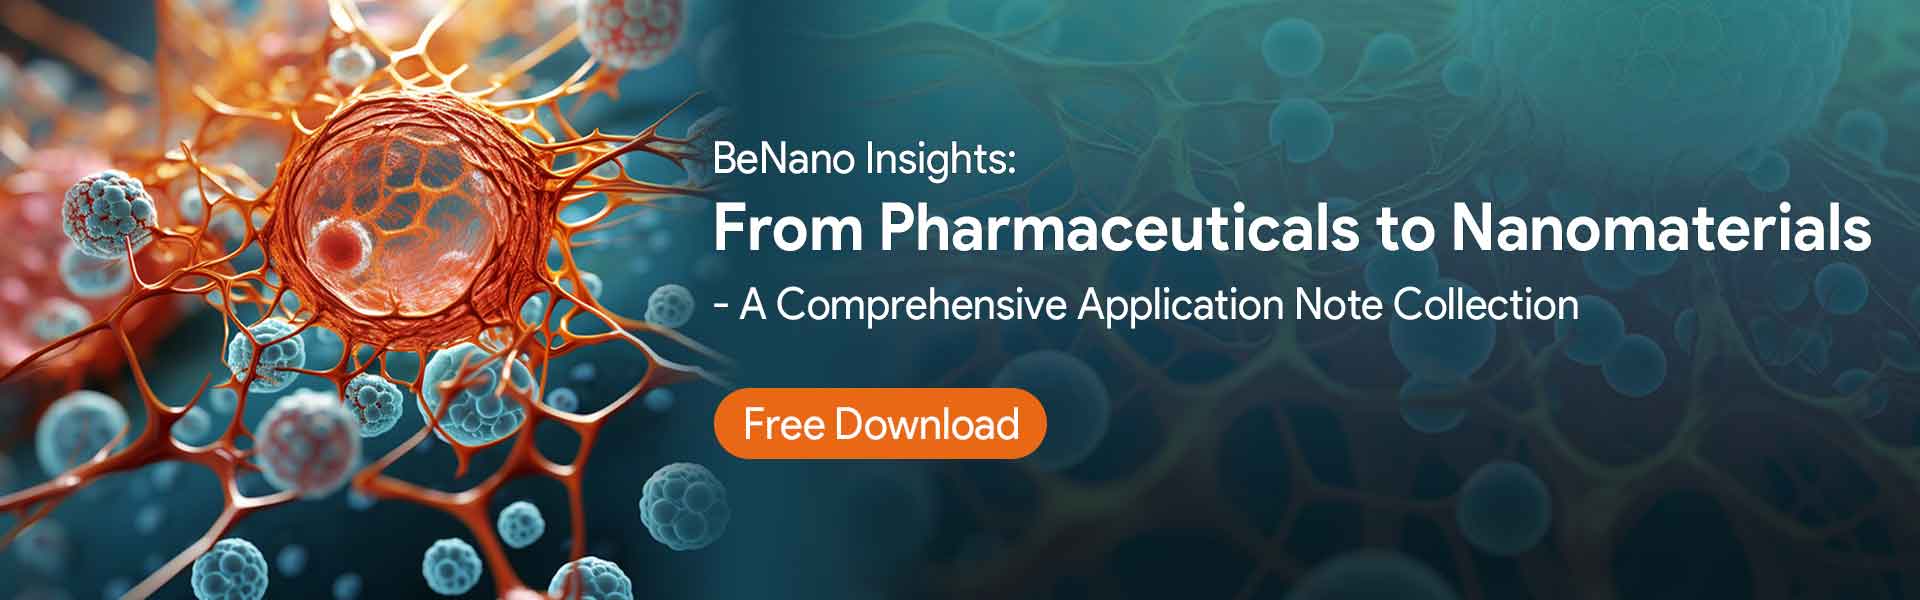 BeNano Insights: From Pharmaceuticals to Nanomaterials - A Comprehensive Application Note Collection